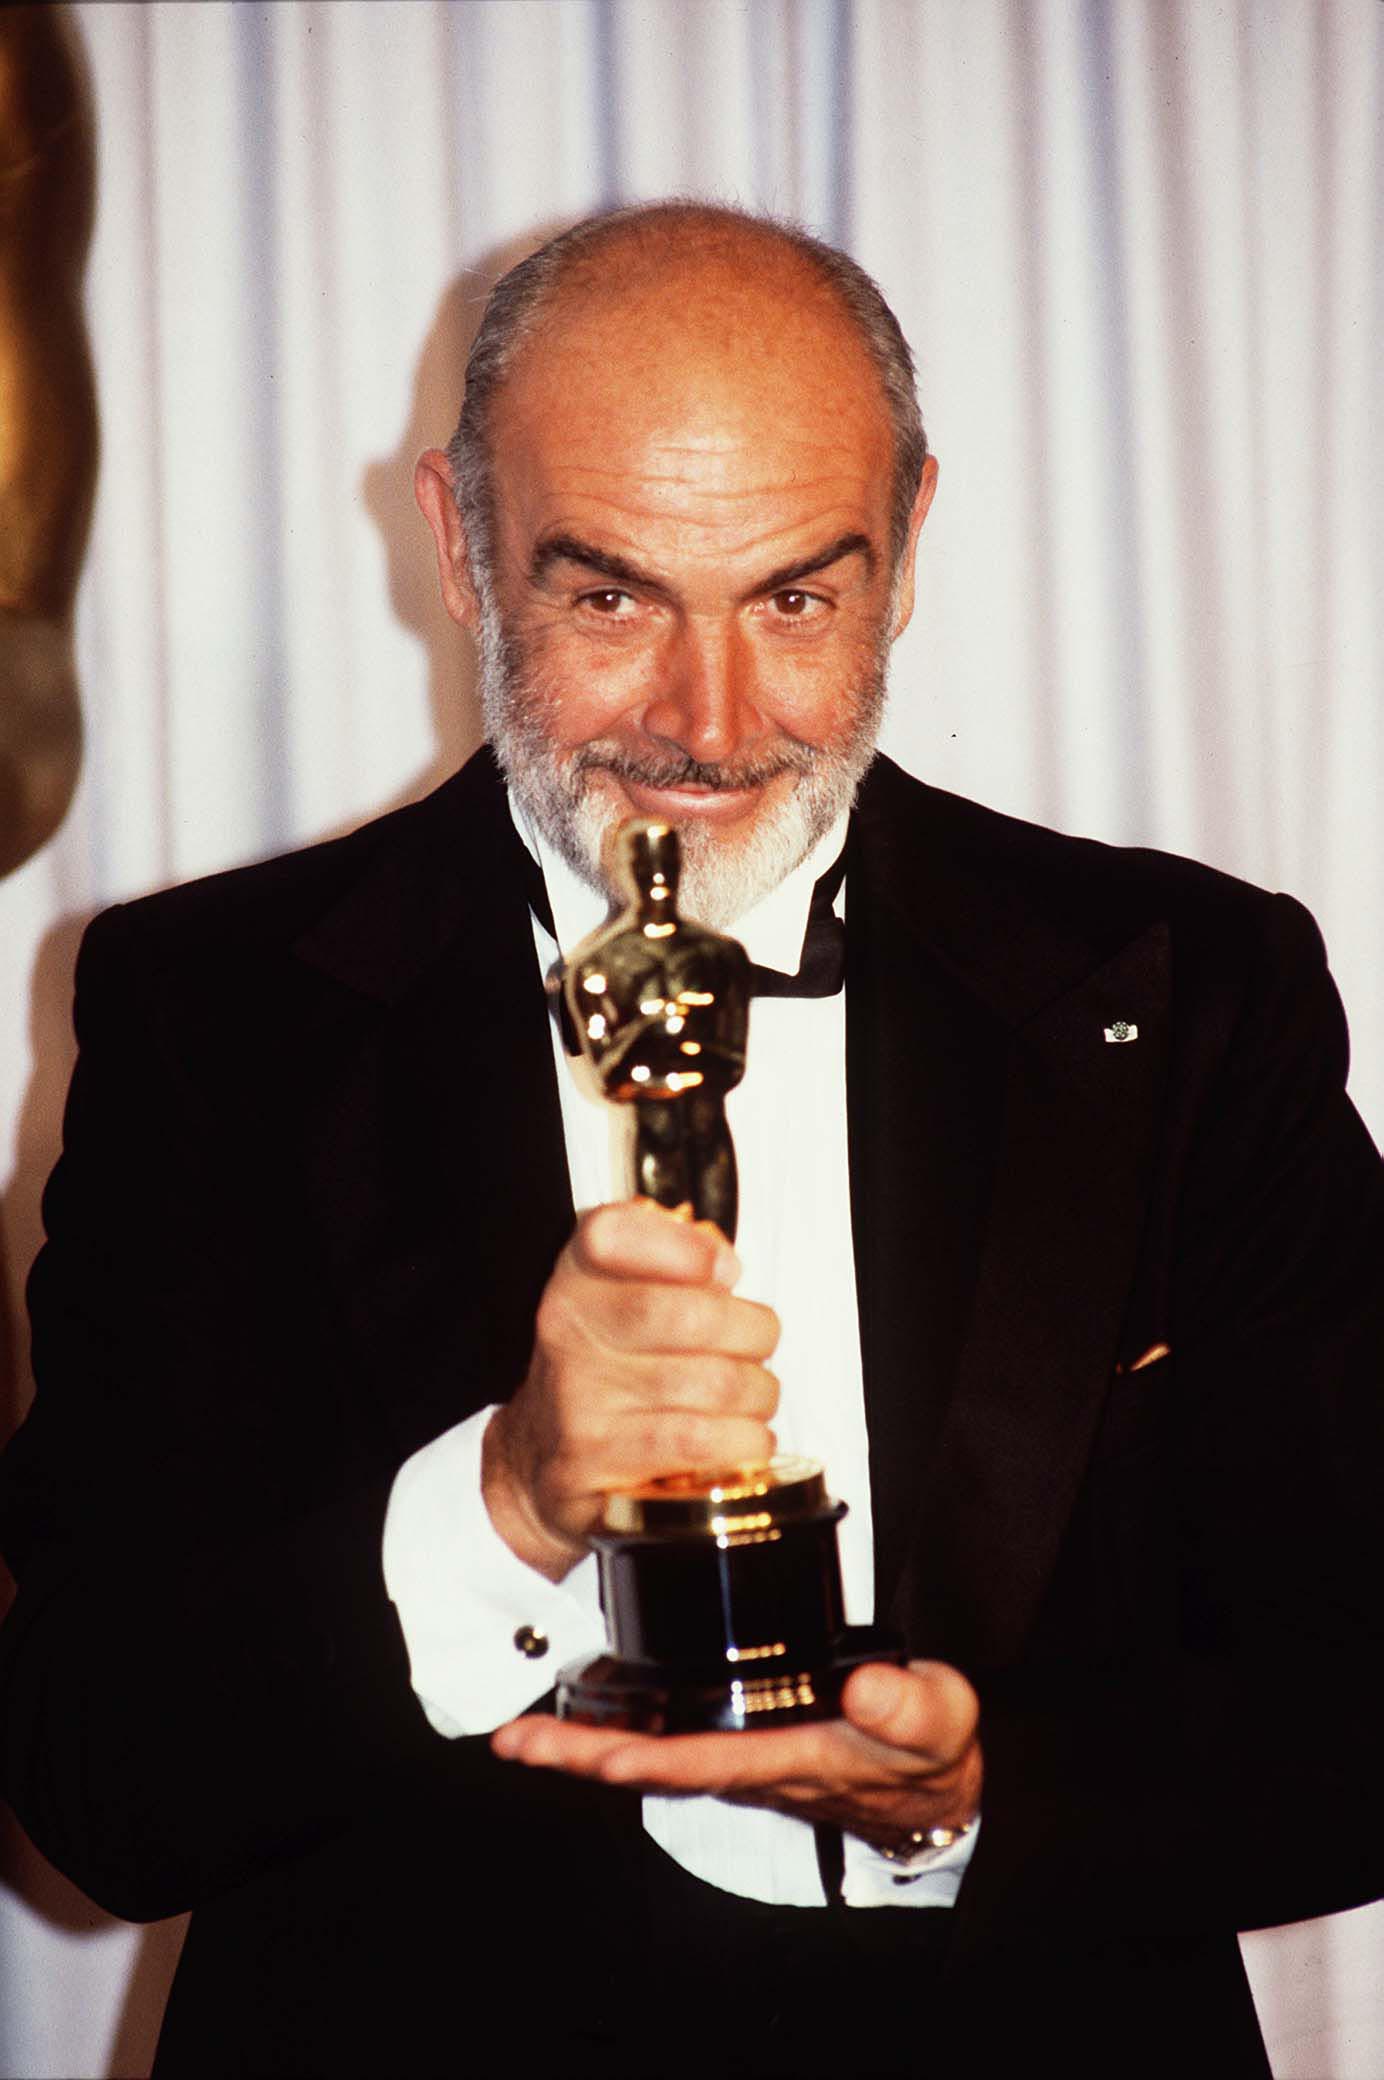 Veteran actor Sean Connery, the first actor to play James Bond, won Best Supporting Actor during the 60th Annual Academy Awards in 1988. | Photo: Getty Images